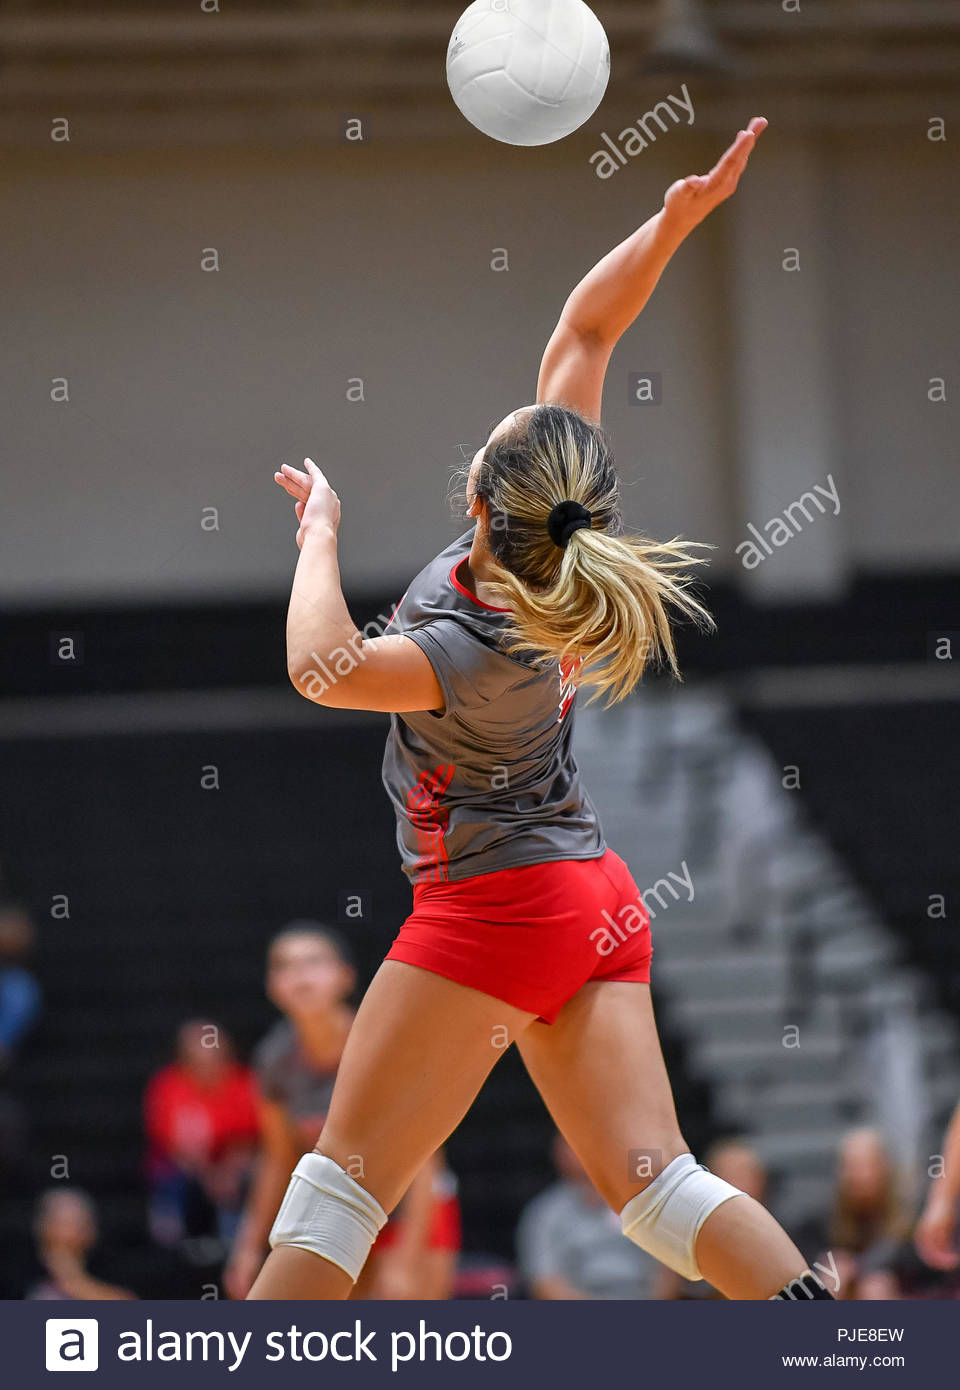 volleyball player girl